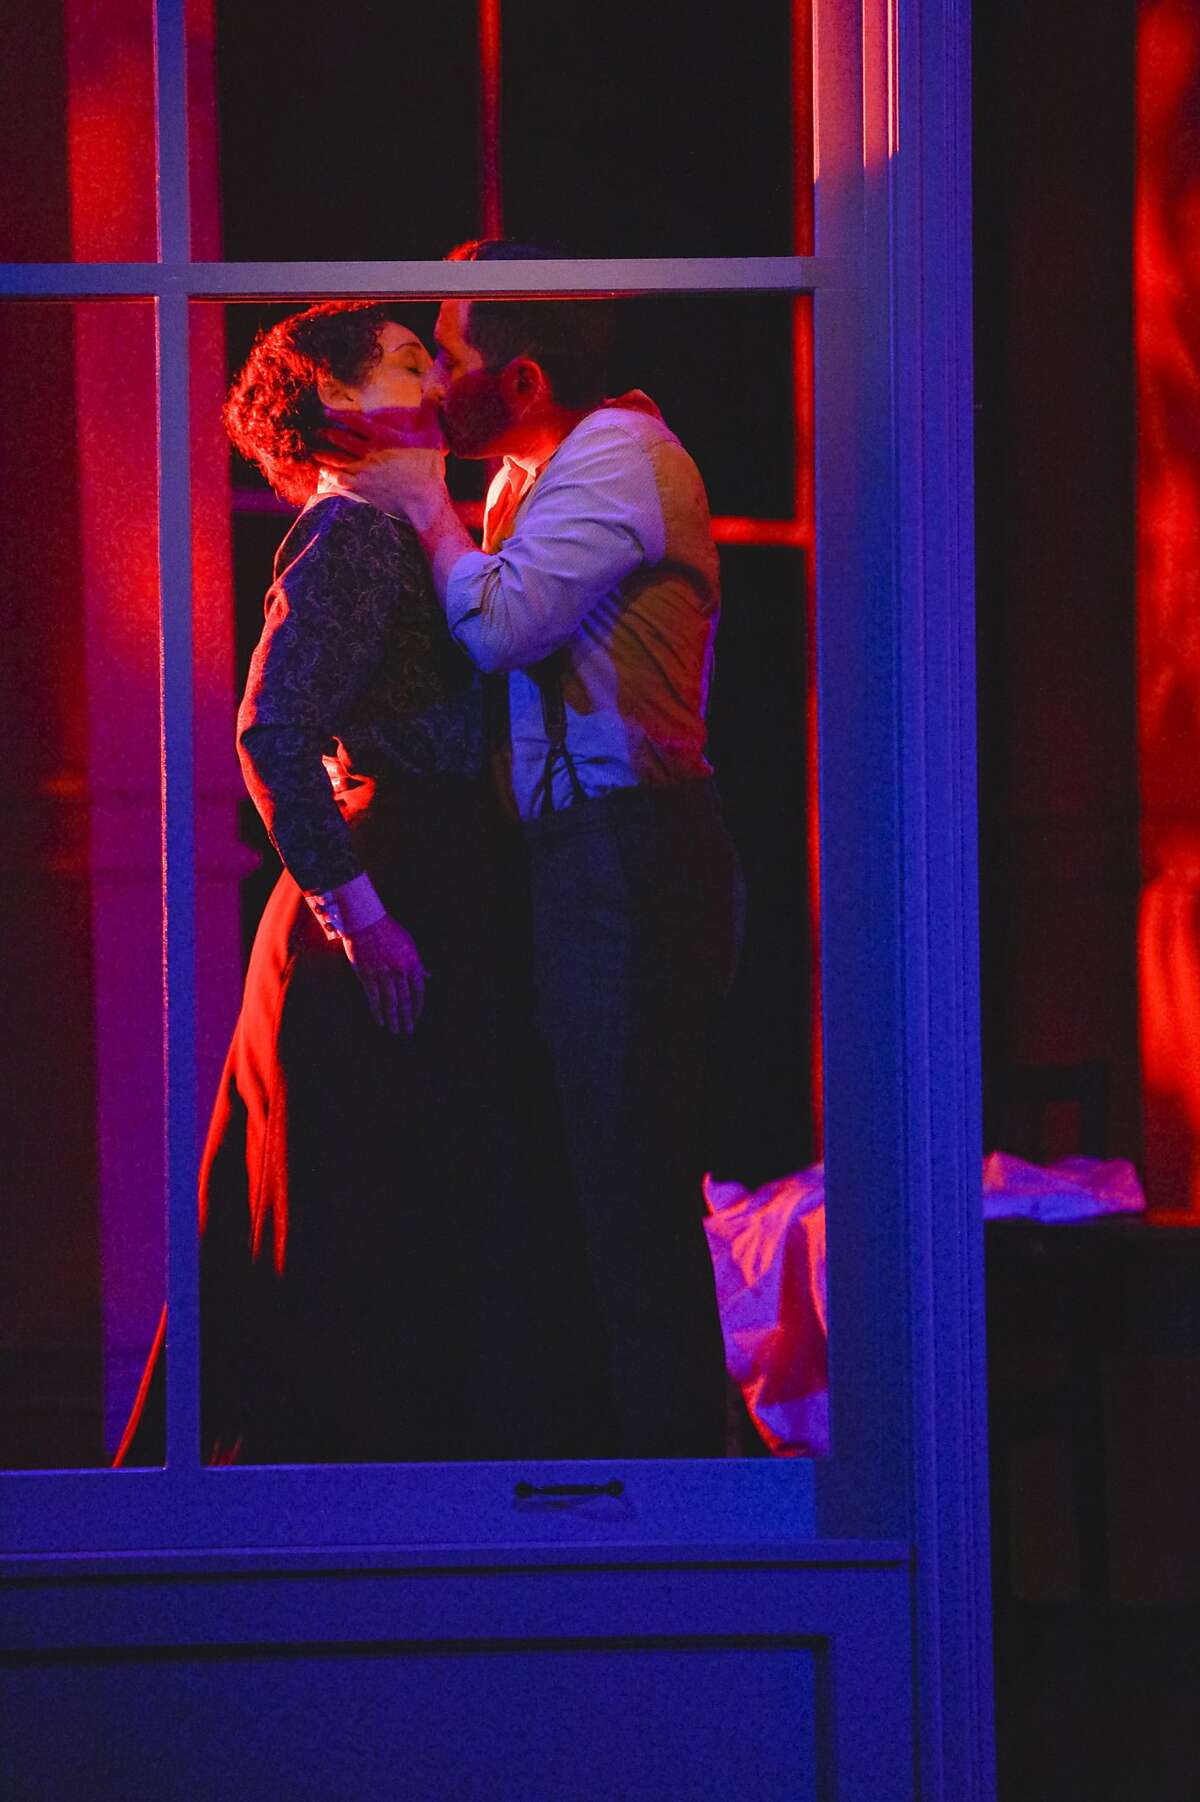 TheatreWorks_Triangle 17_KevinBerne: Sarah (Megan McGinnis) and Vincenzo (Zachary Prince) share a final kiss in TheatreWorks Silicon Valley's World Premiere of Triangle playing July 8 - August 2 at the Lucie Stern Theatre in Palo Alto.